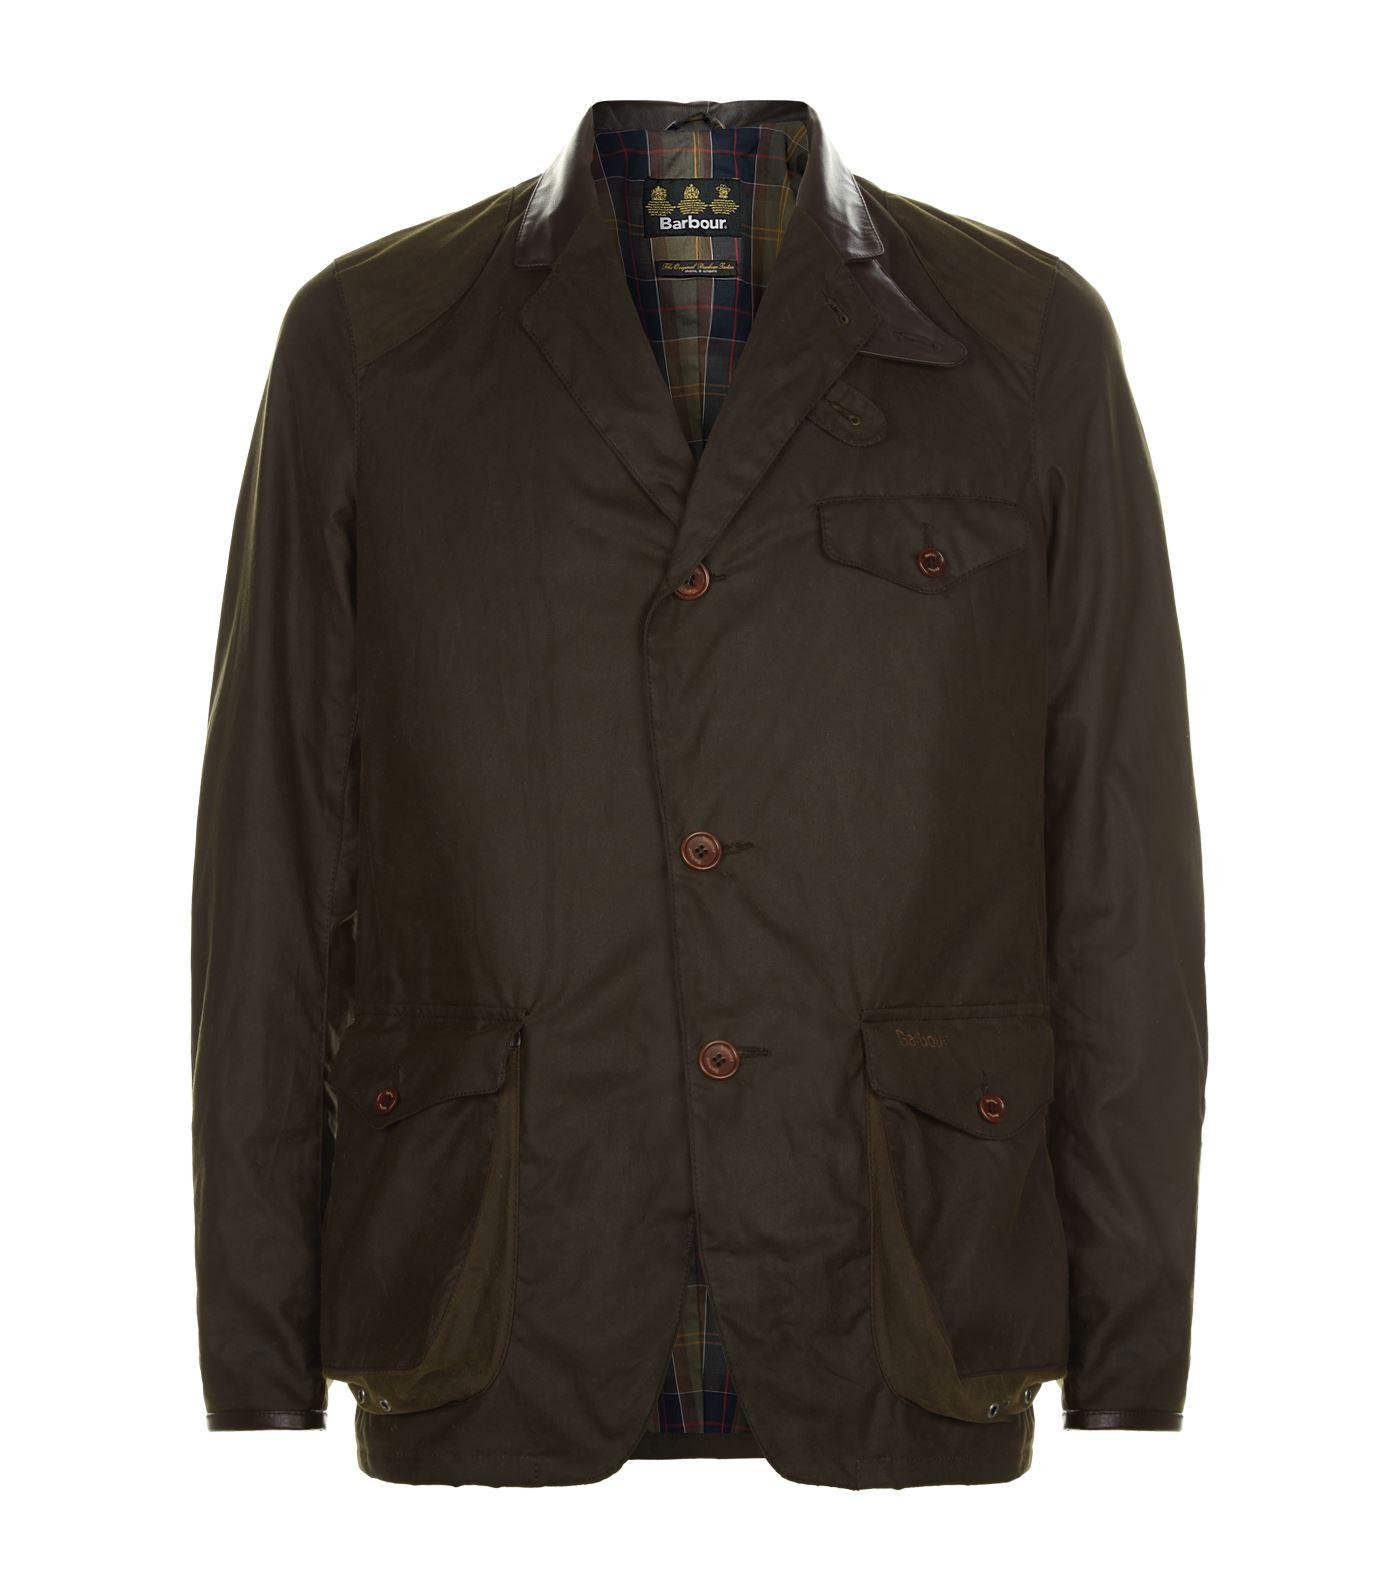 Barbour Wool Heritage Beacon Sports Jacket in Green for Men - Lyst